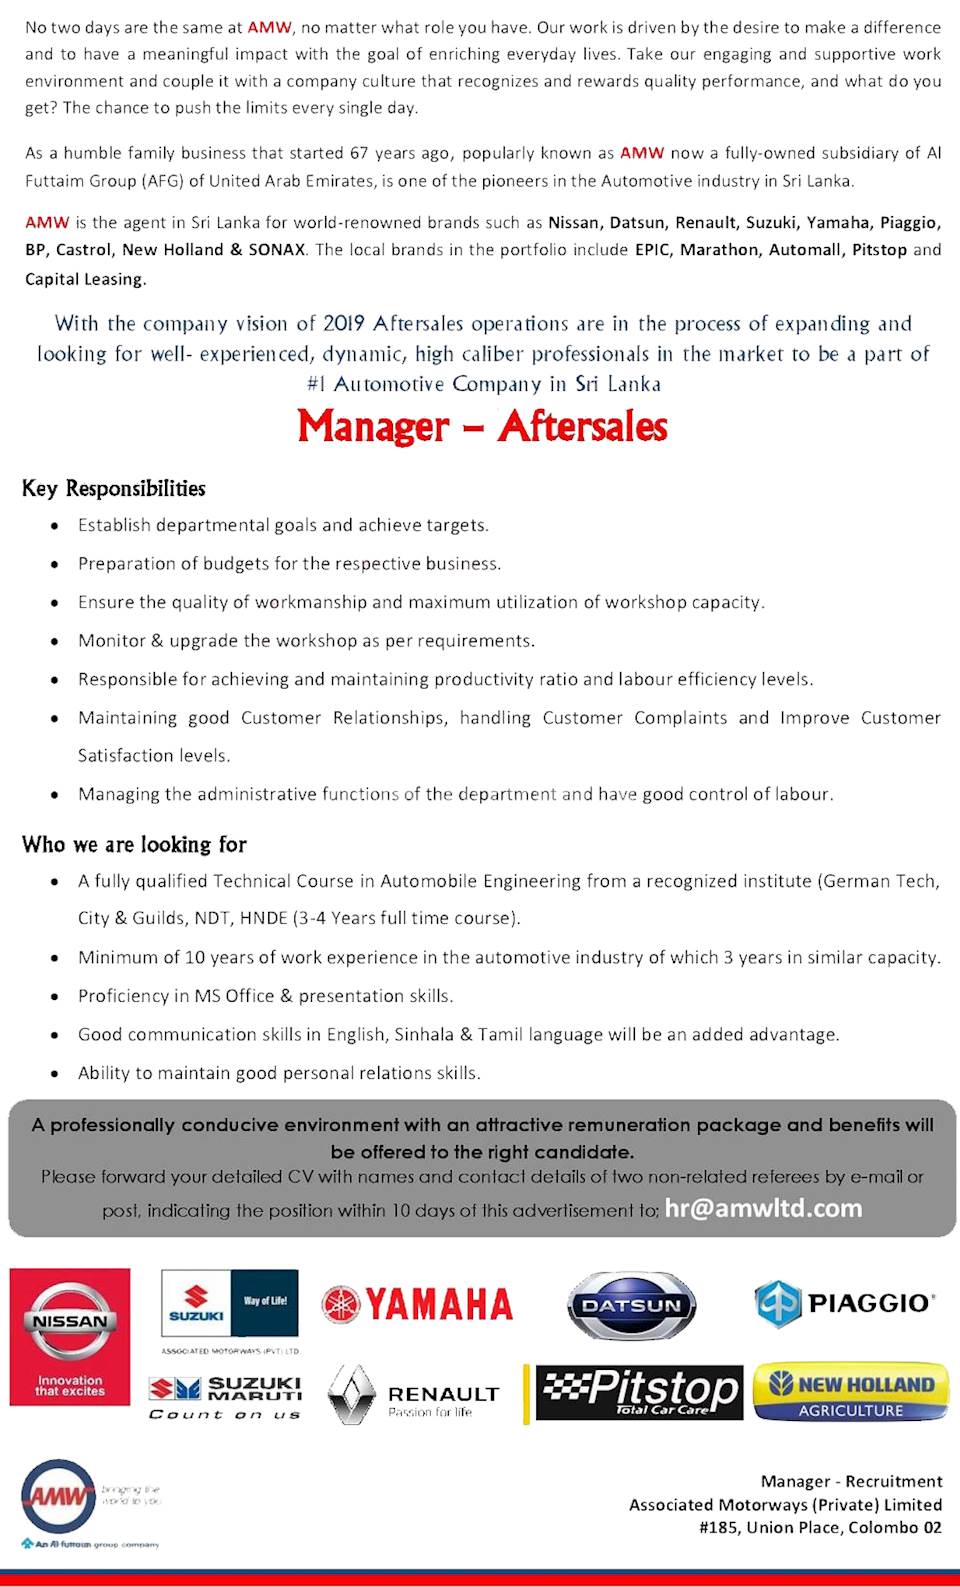 Manager - Aftersales